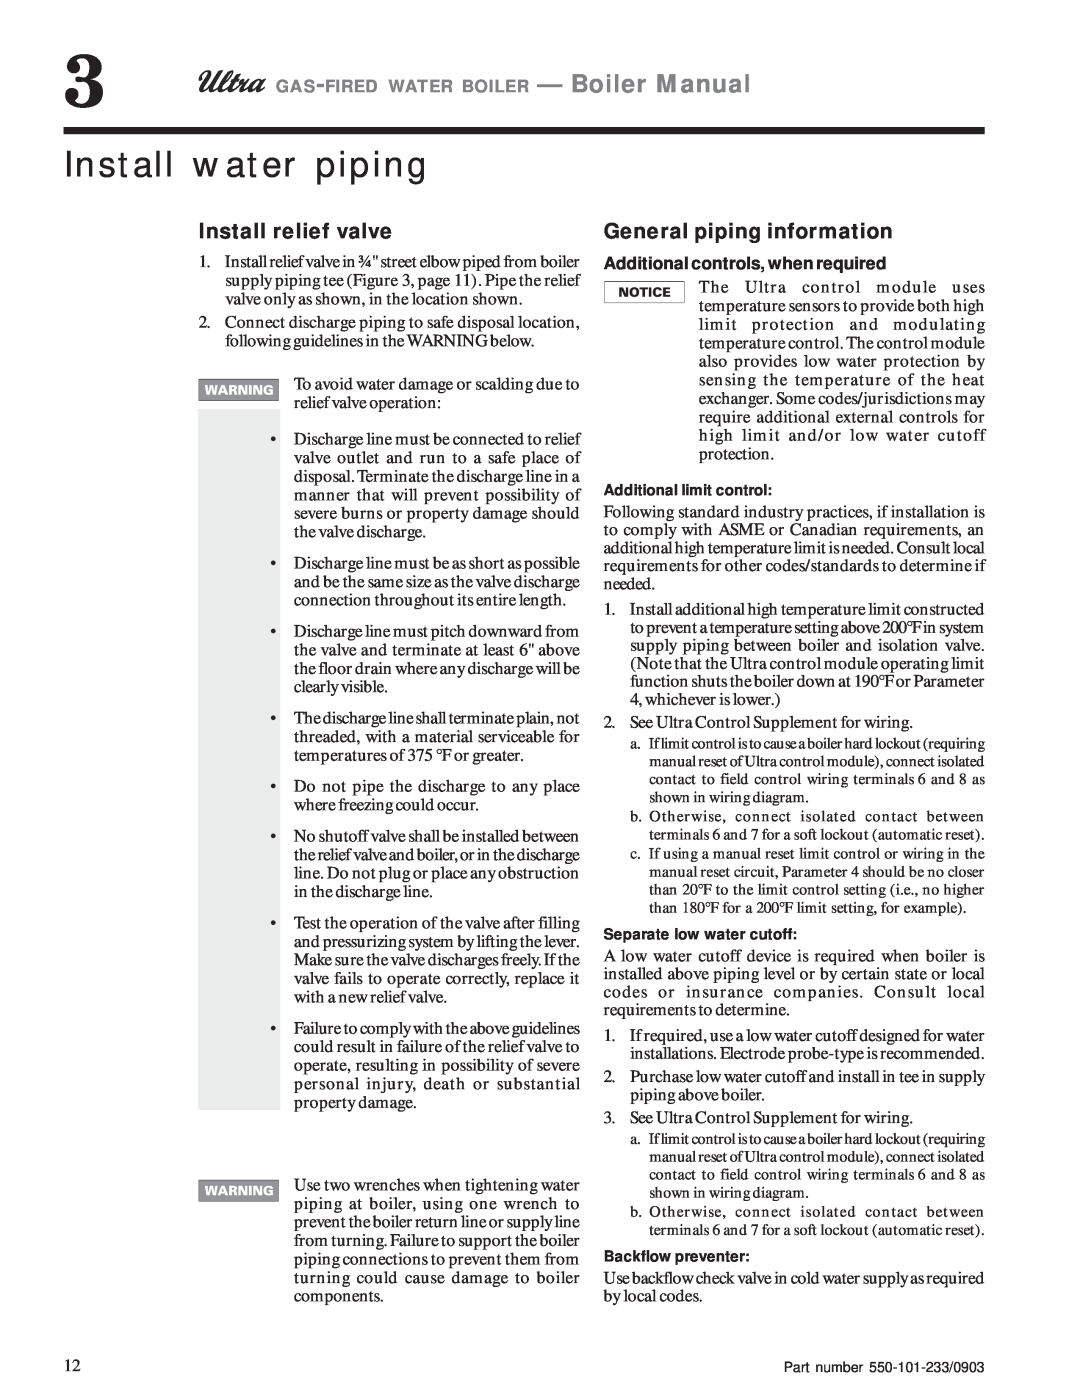 Weil-McLain 310 Install water piping, Install relief valve, General piping information, Additional controls, when required 